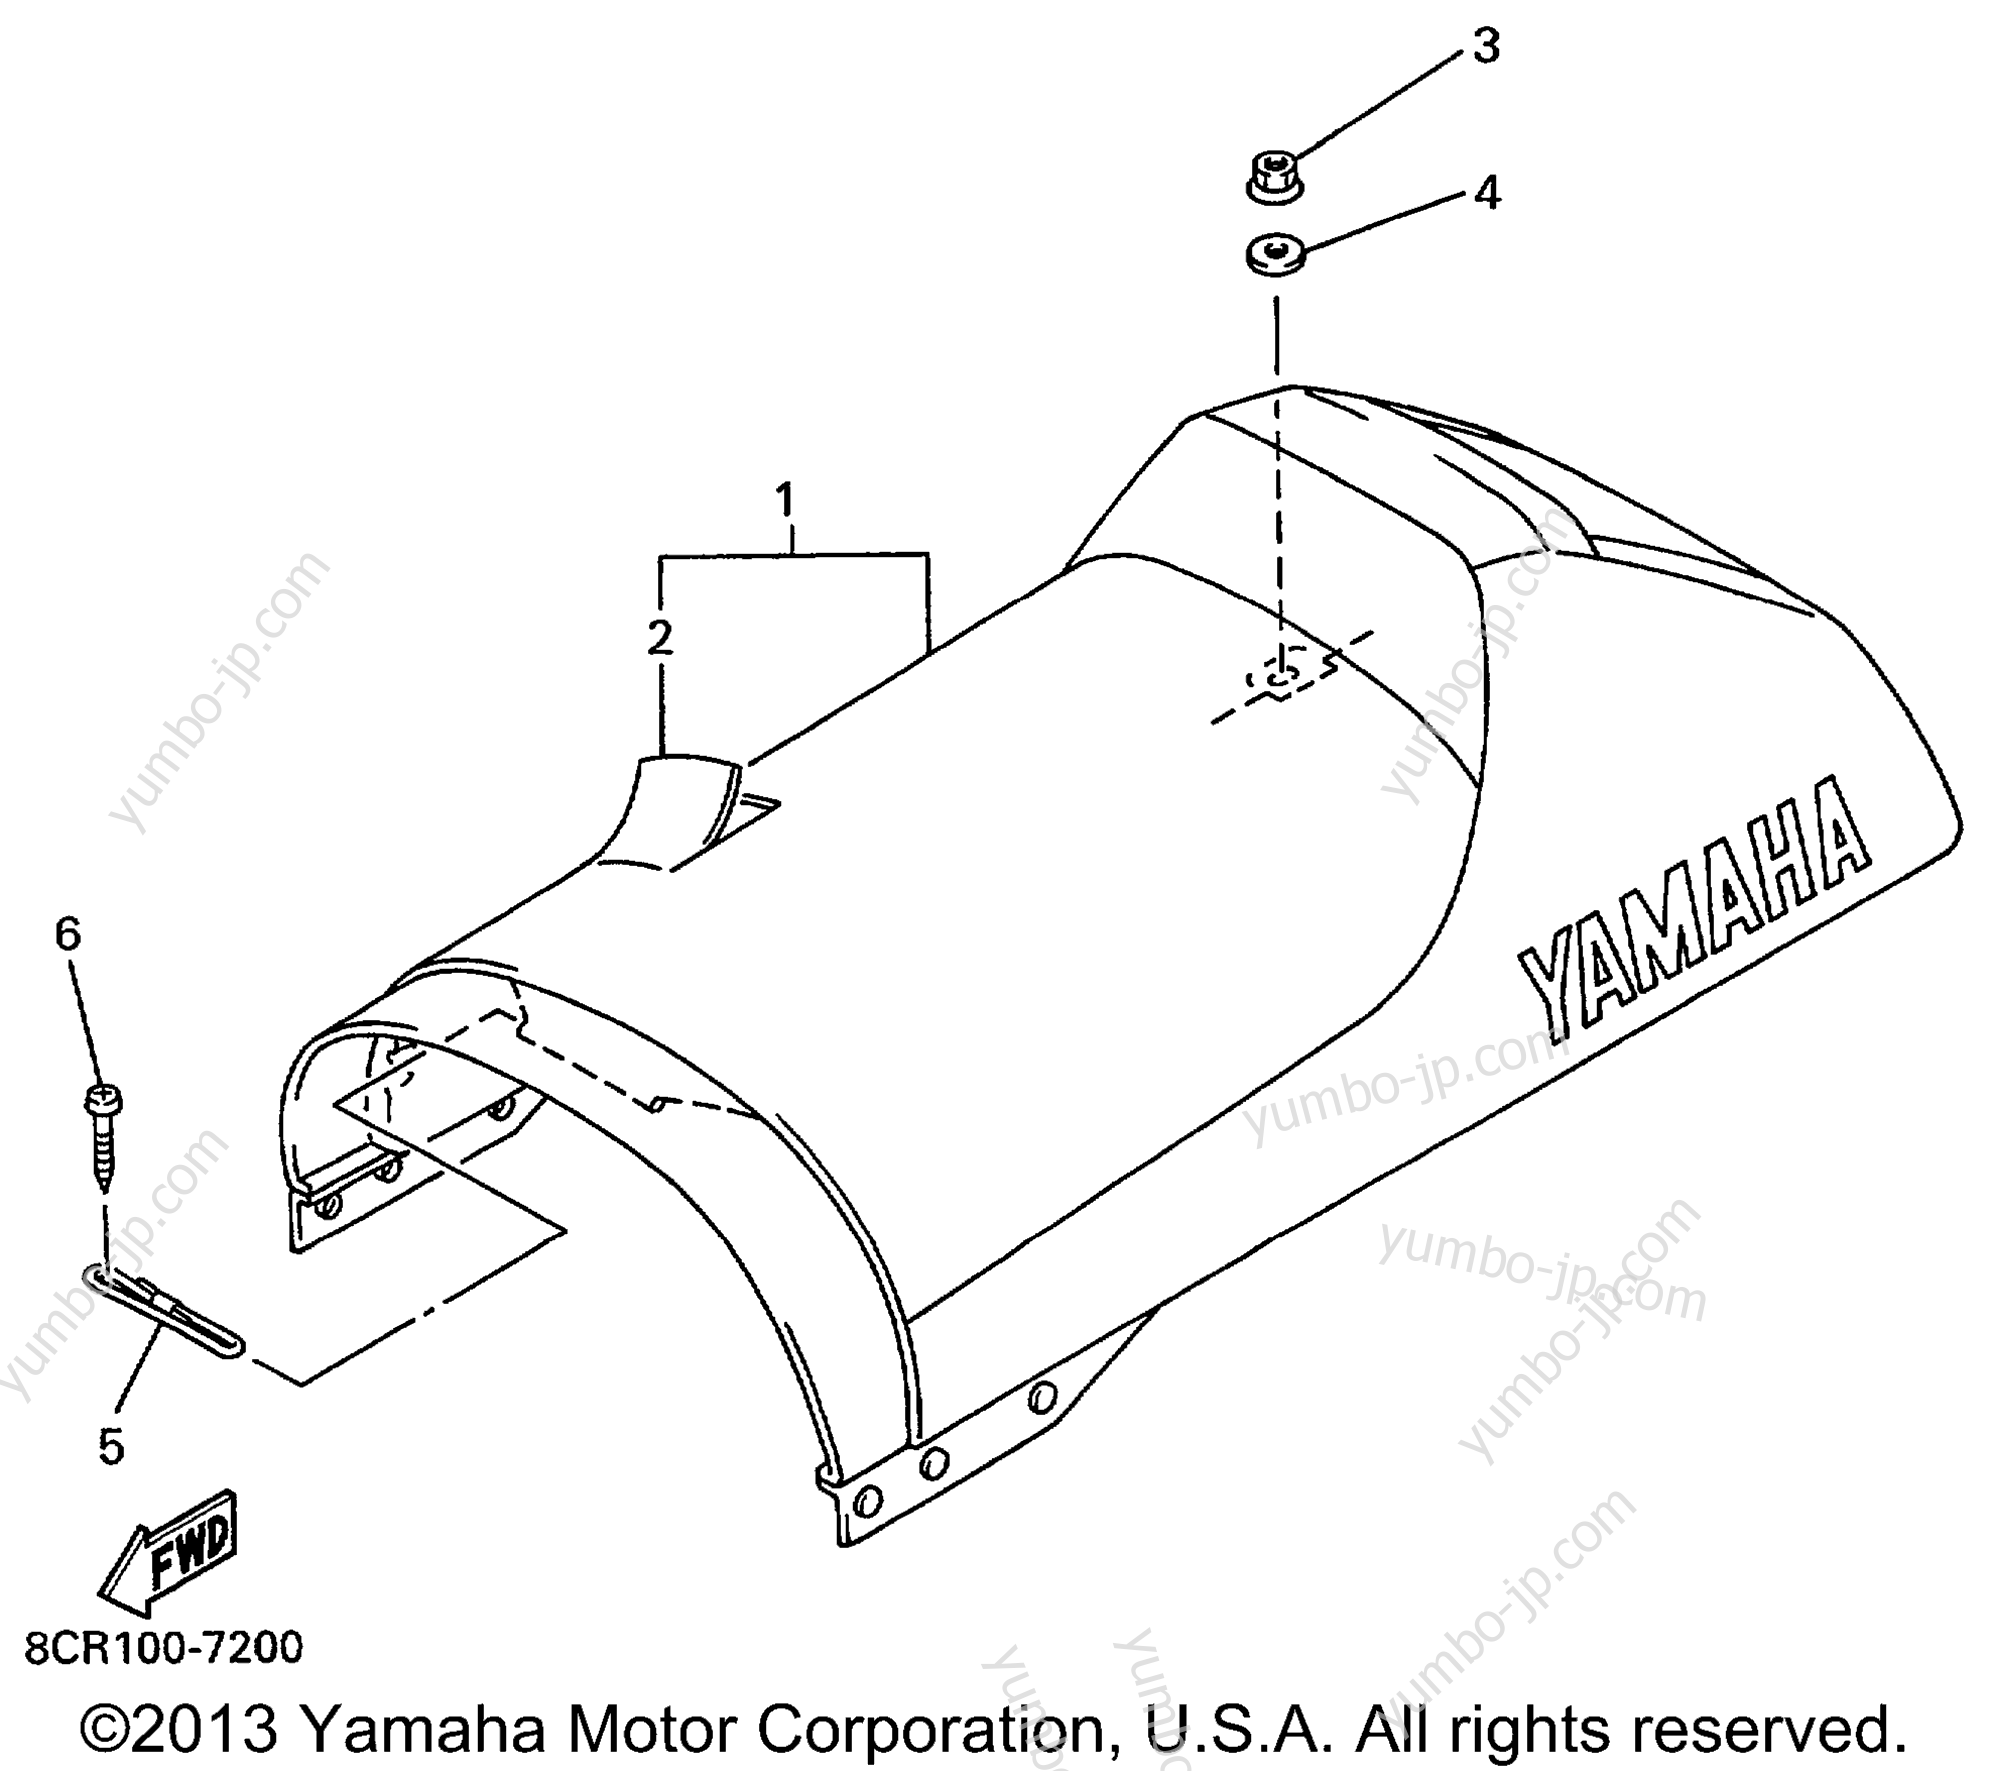 SEAT for snowmobiles YAMAHA VMAX 700 DELUXE (ELEC START) (VX700ERC) 1999 year